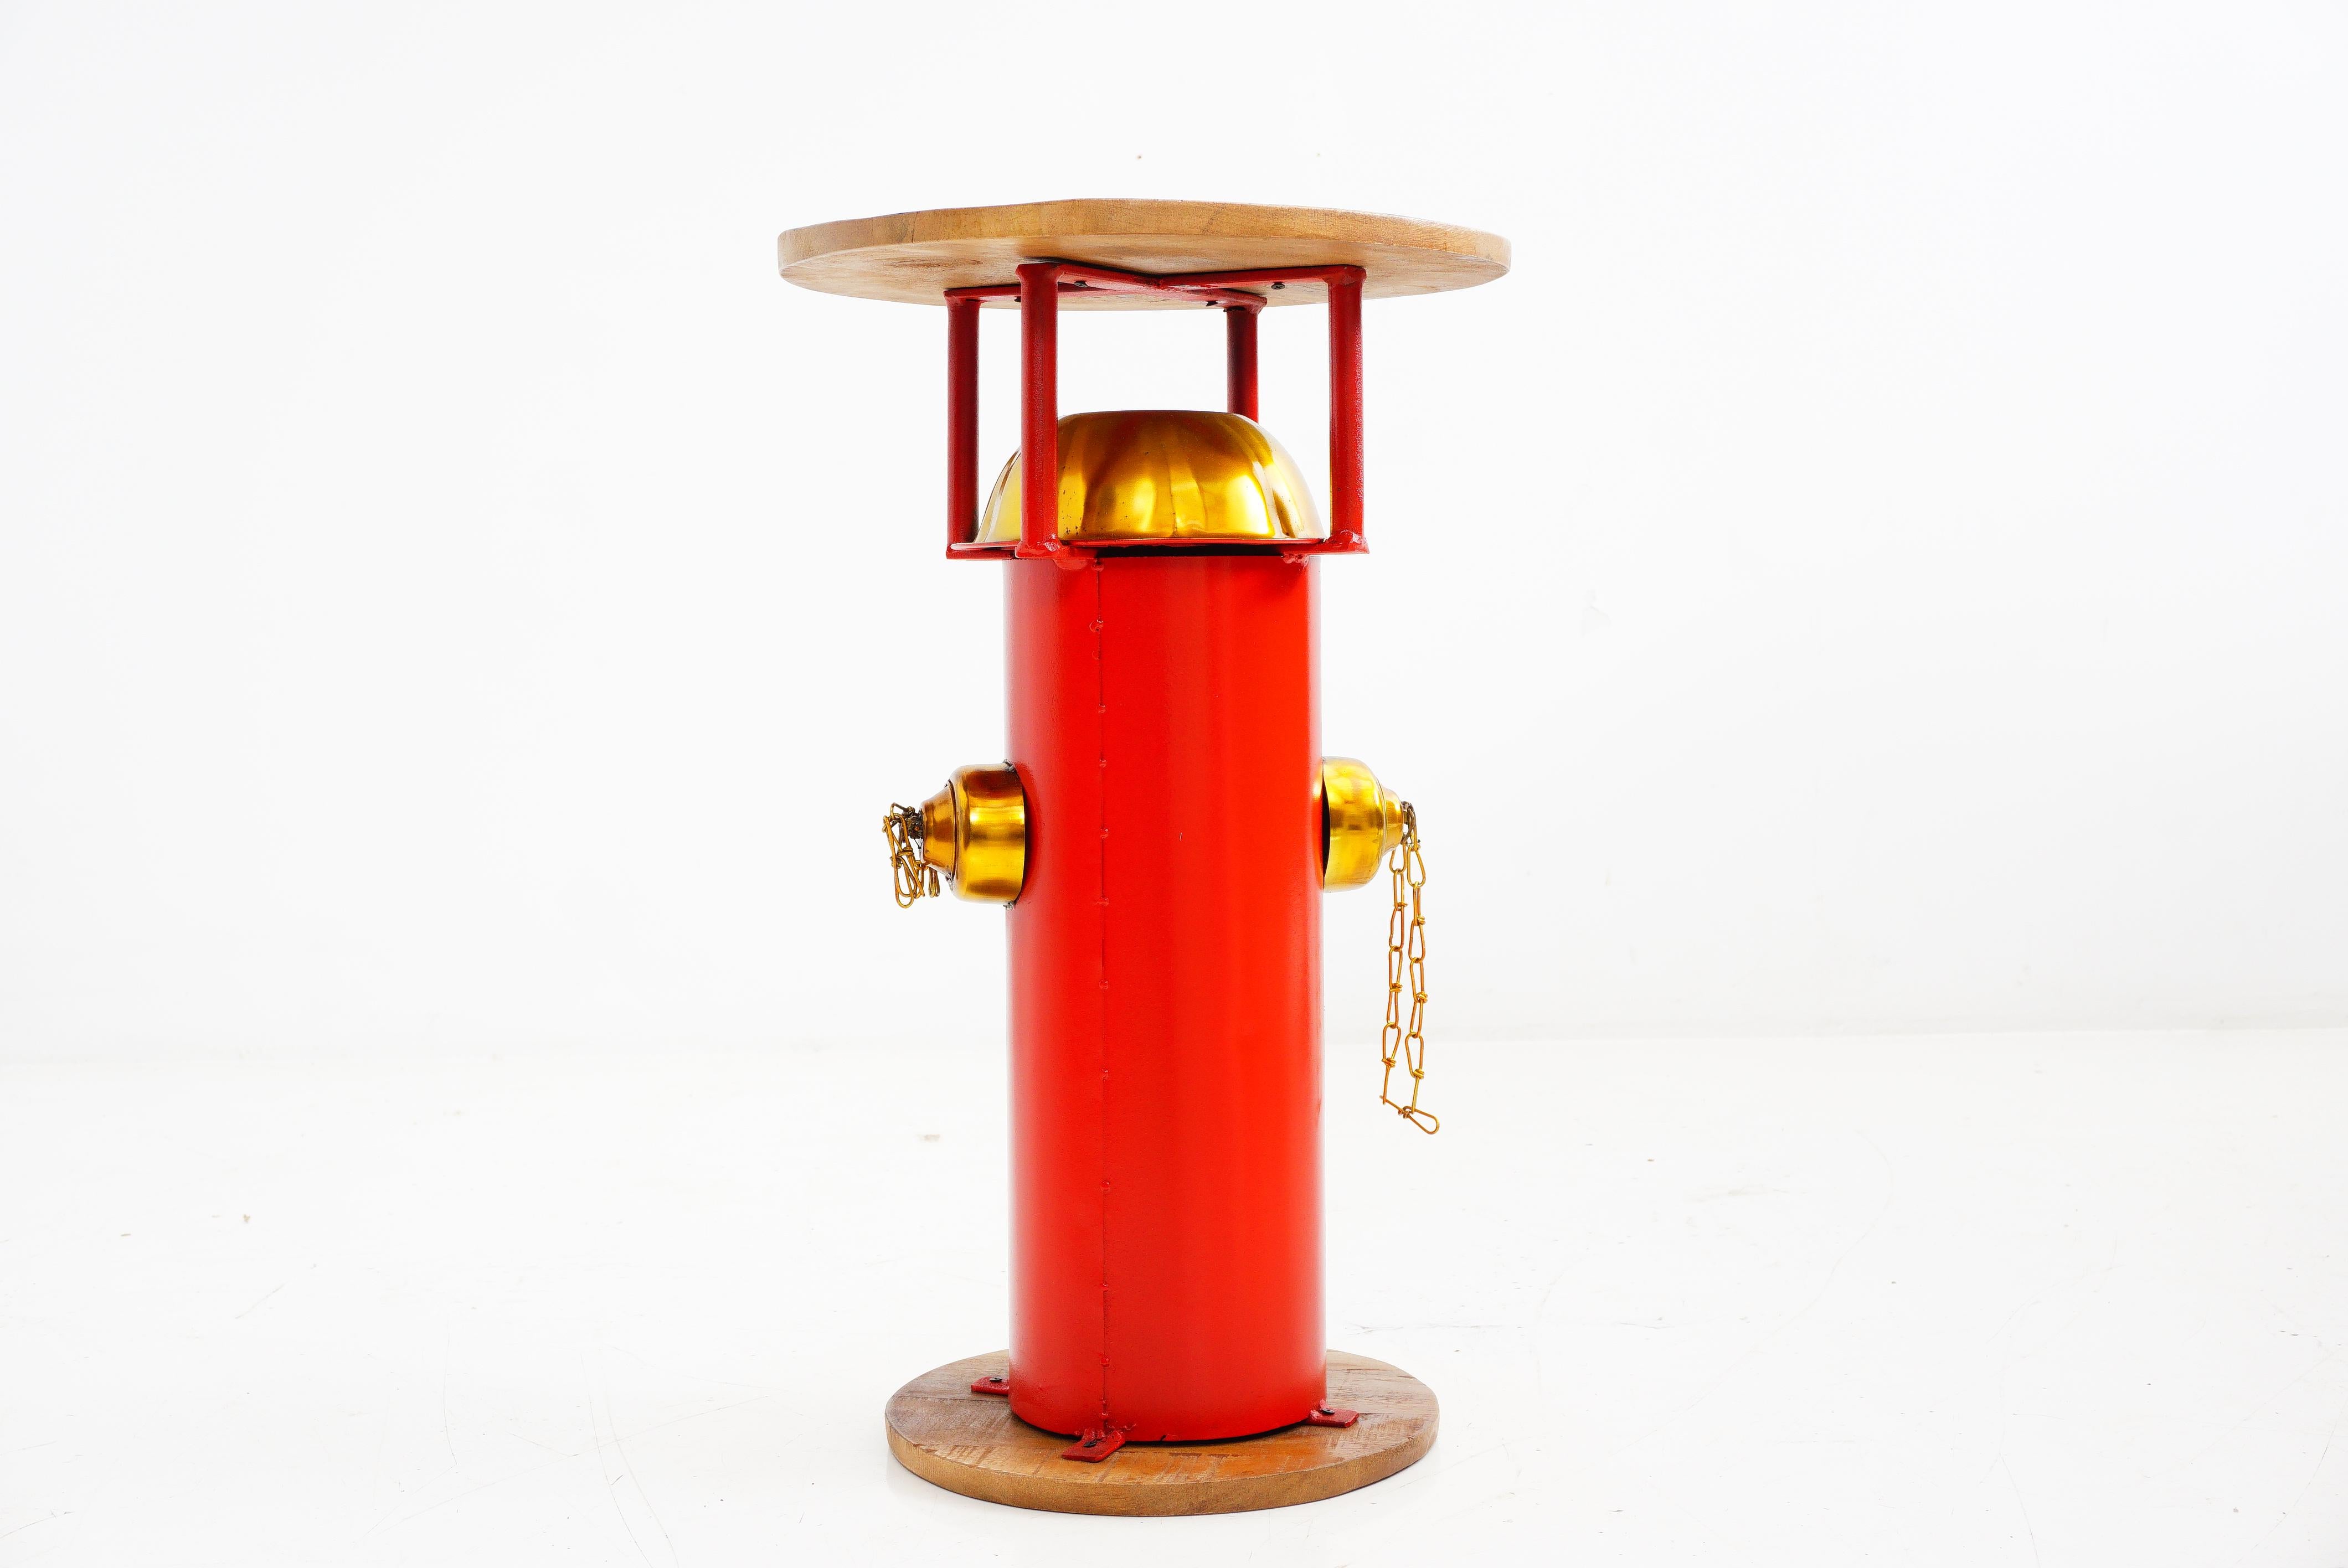 This accent table in the shape of a fire hydrant is here to ignite your home with a burst of color and a whole lot of personality. No emergencies, just exceptional style and a touch of whimsy.

- 26.5